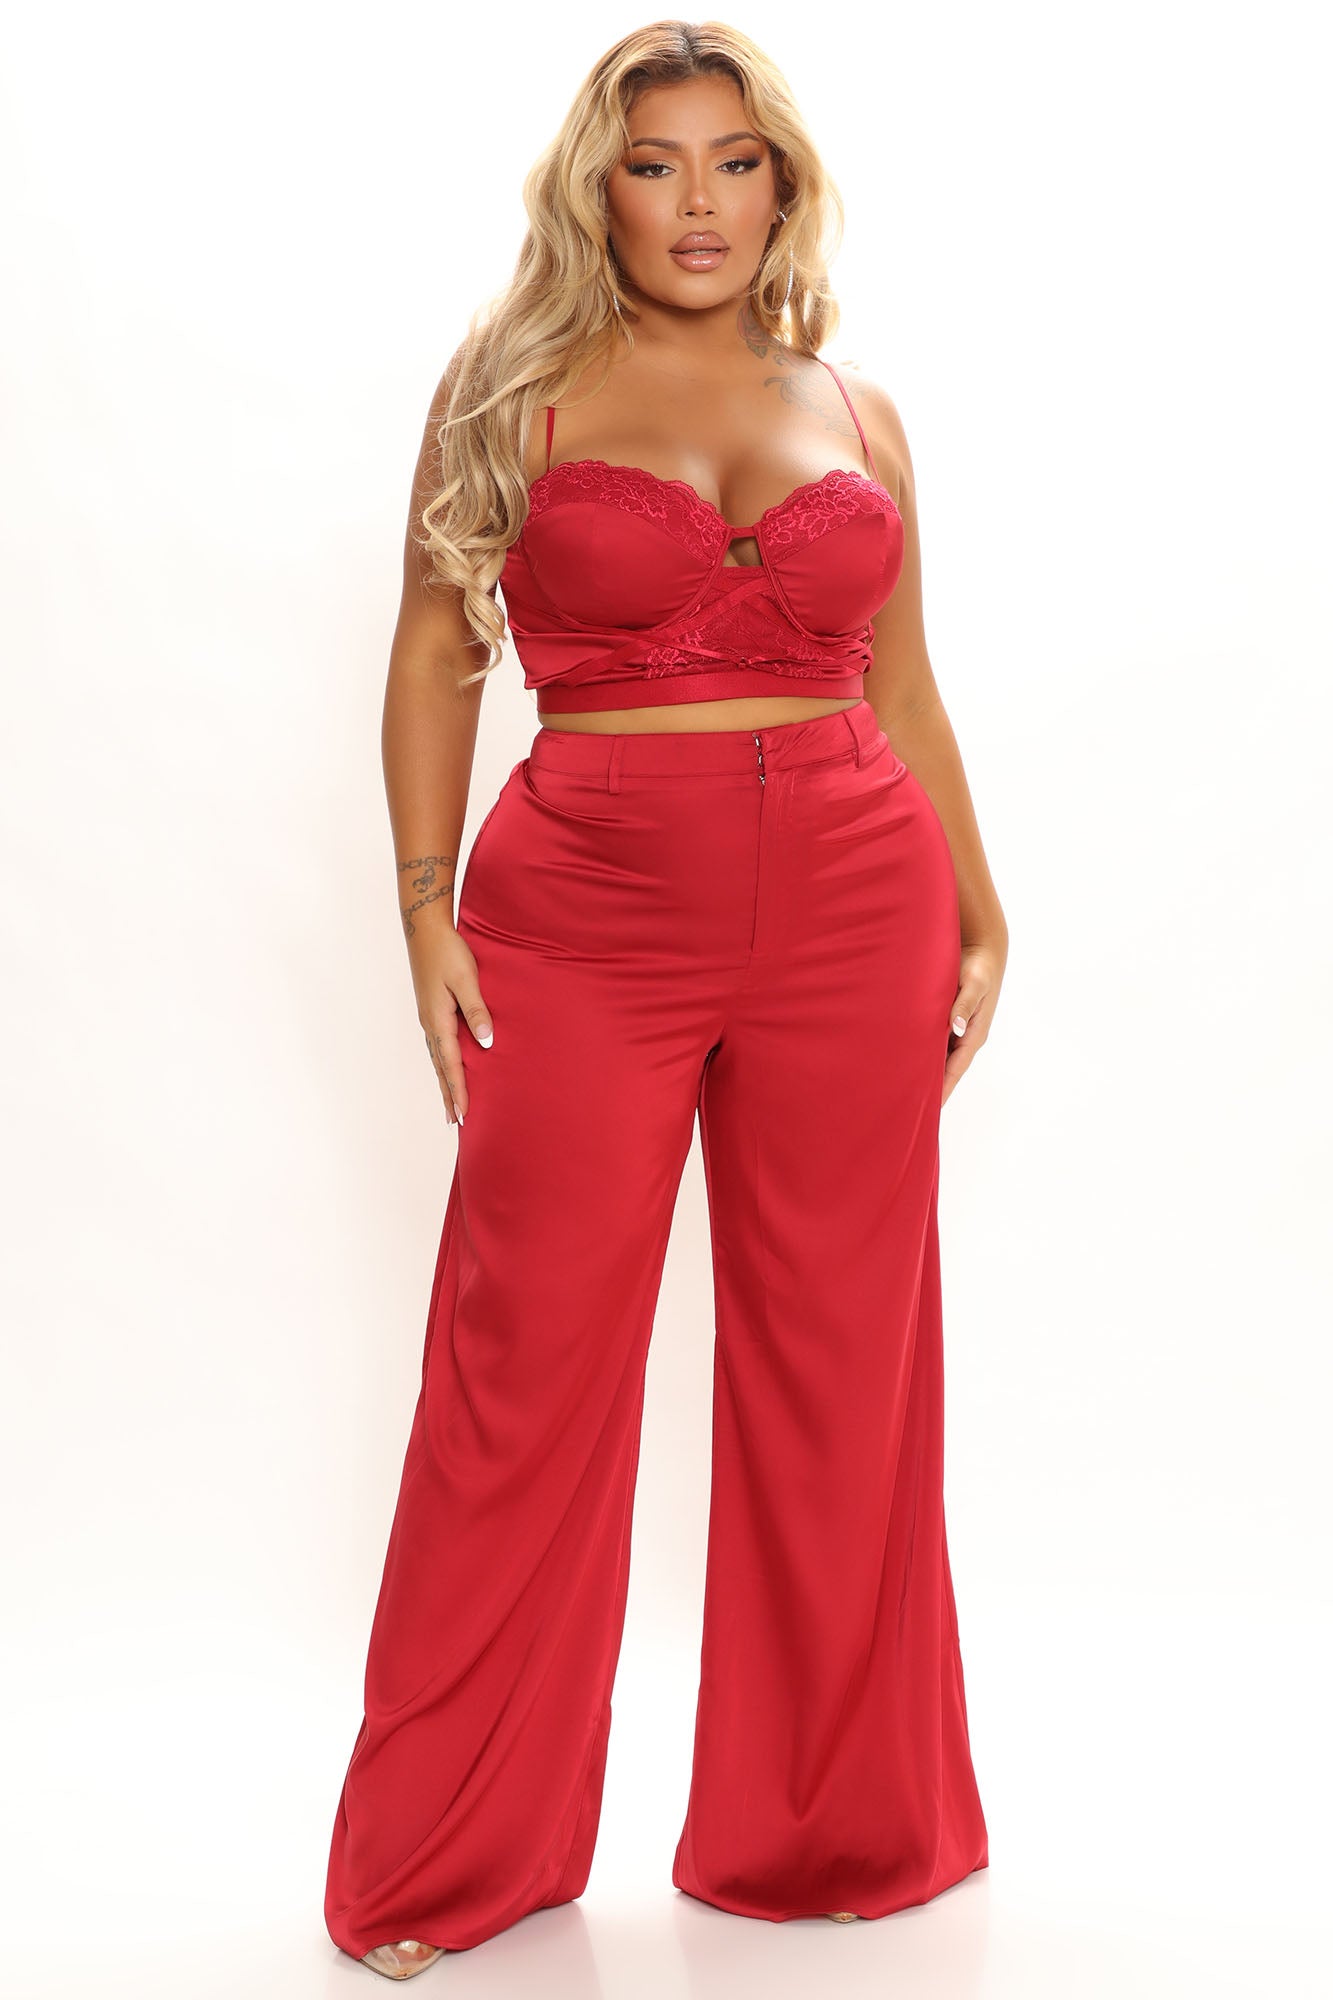 LLstyle In Your Dreams Burgundy Pant Set